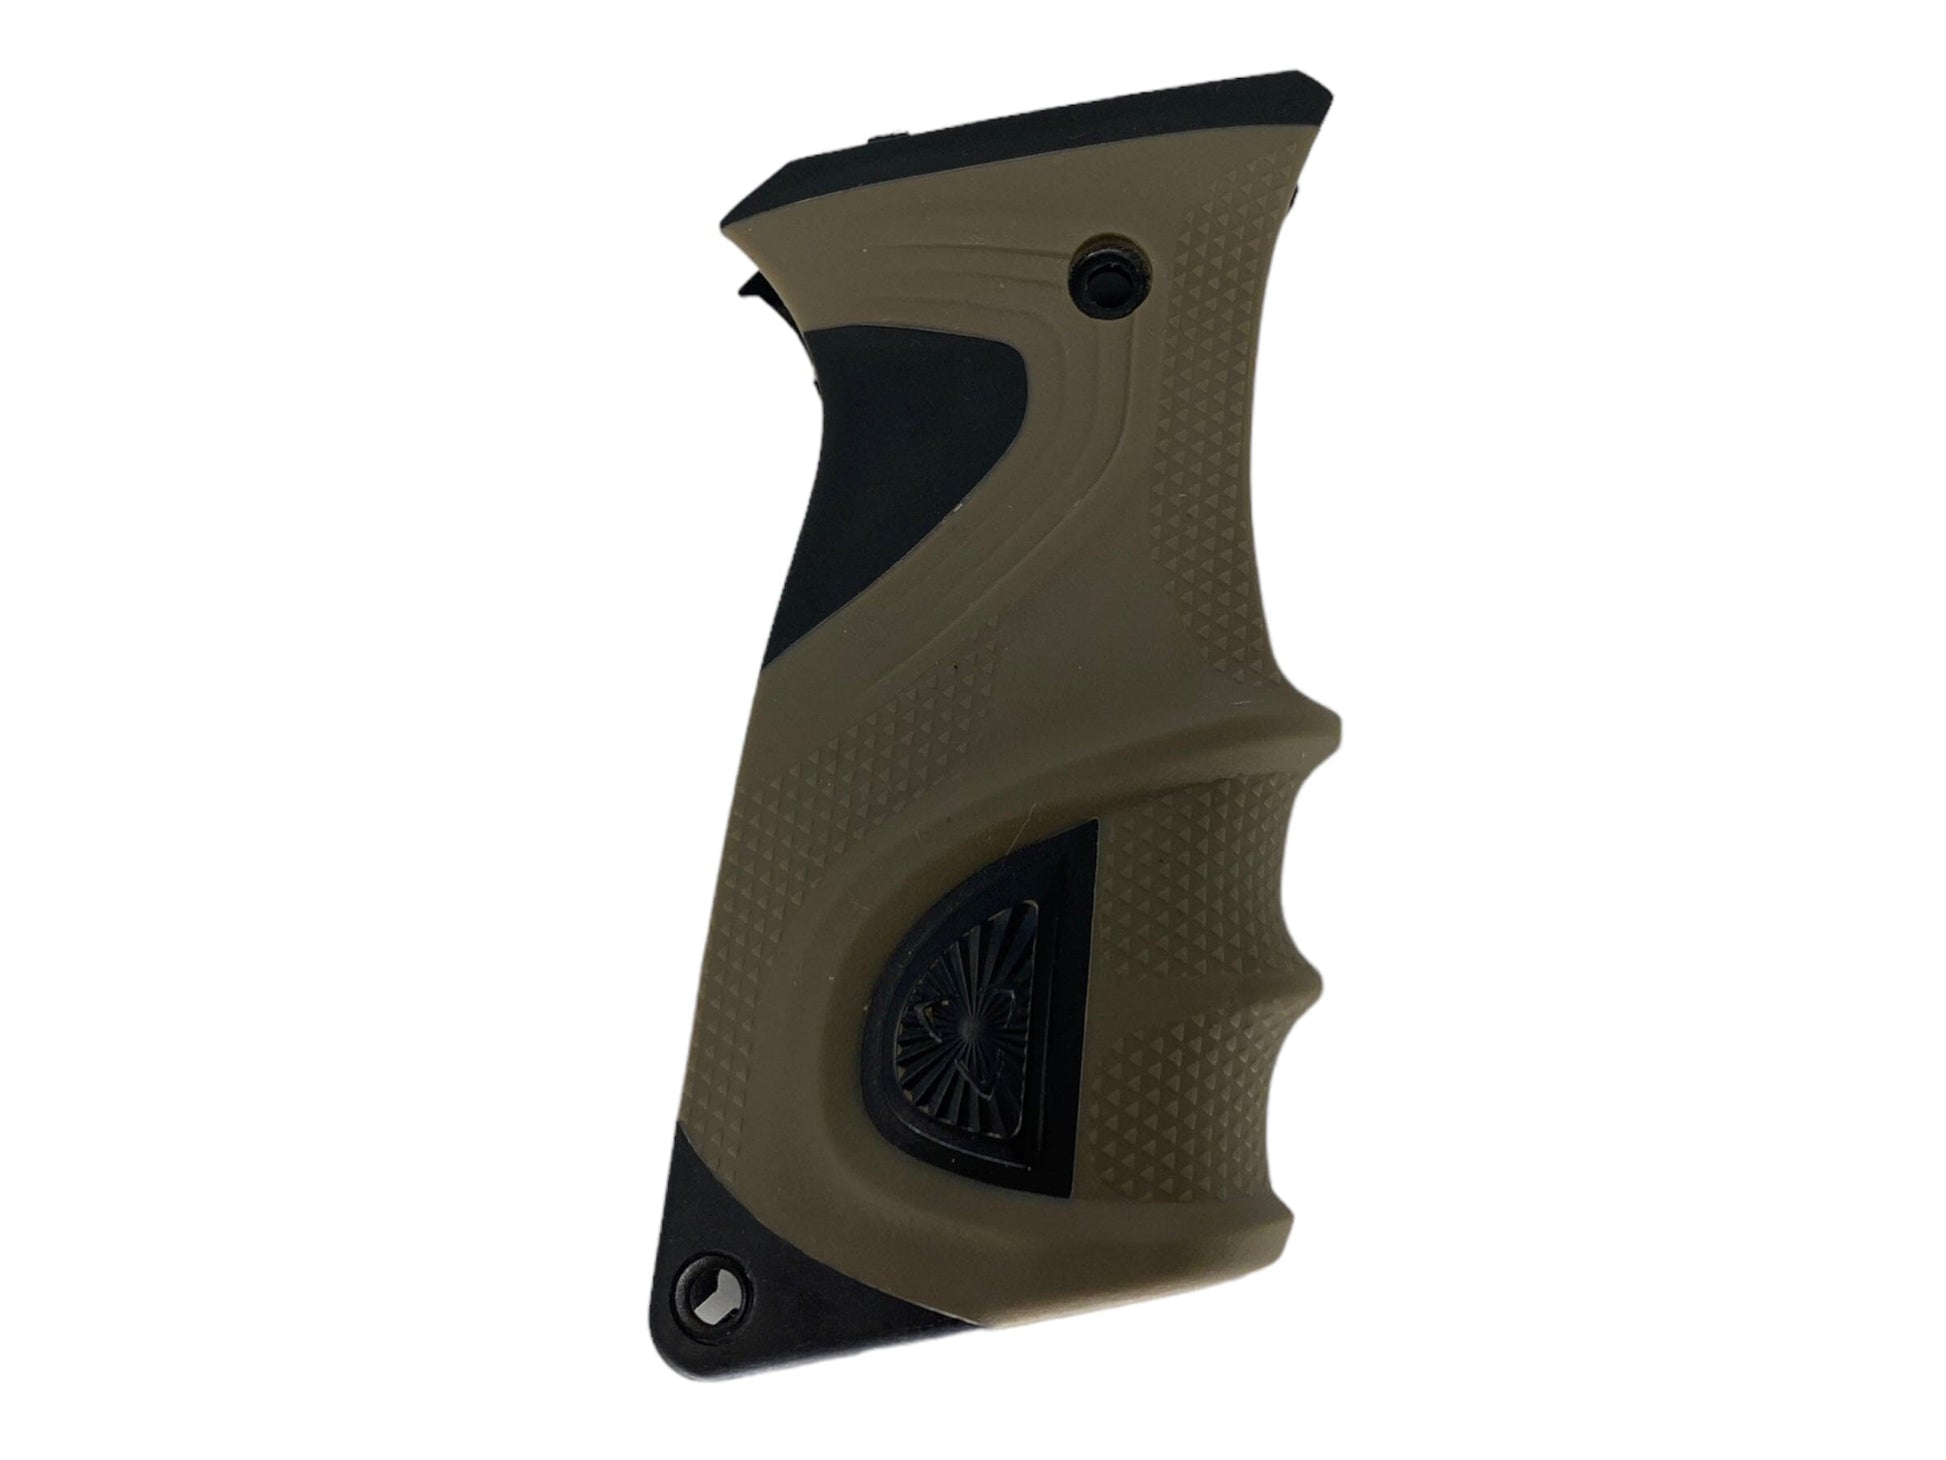 Used DLX Luxe TM40 Colored Grip Kit - Brown Paintball Gun from CPXBrosPaintball Buy/Sell/Trade Paintball Markers, Paintball Hoppers, Paintball Masks, and Hormesis Headbands